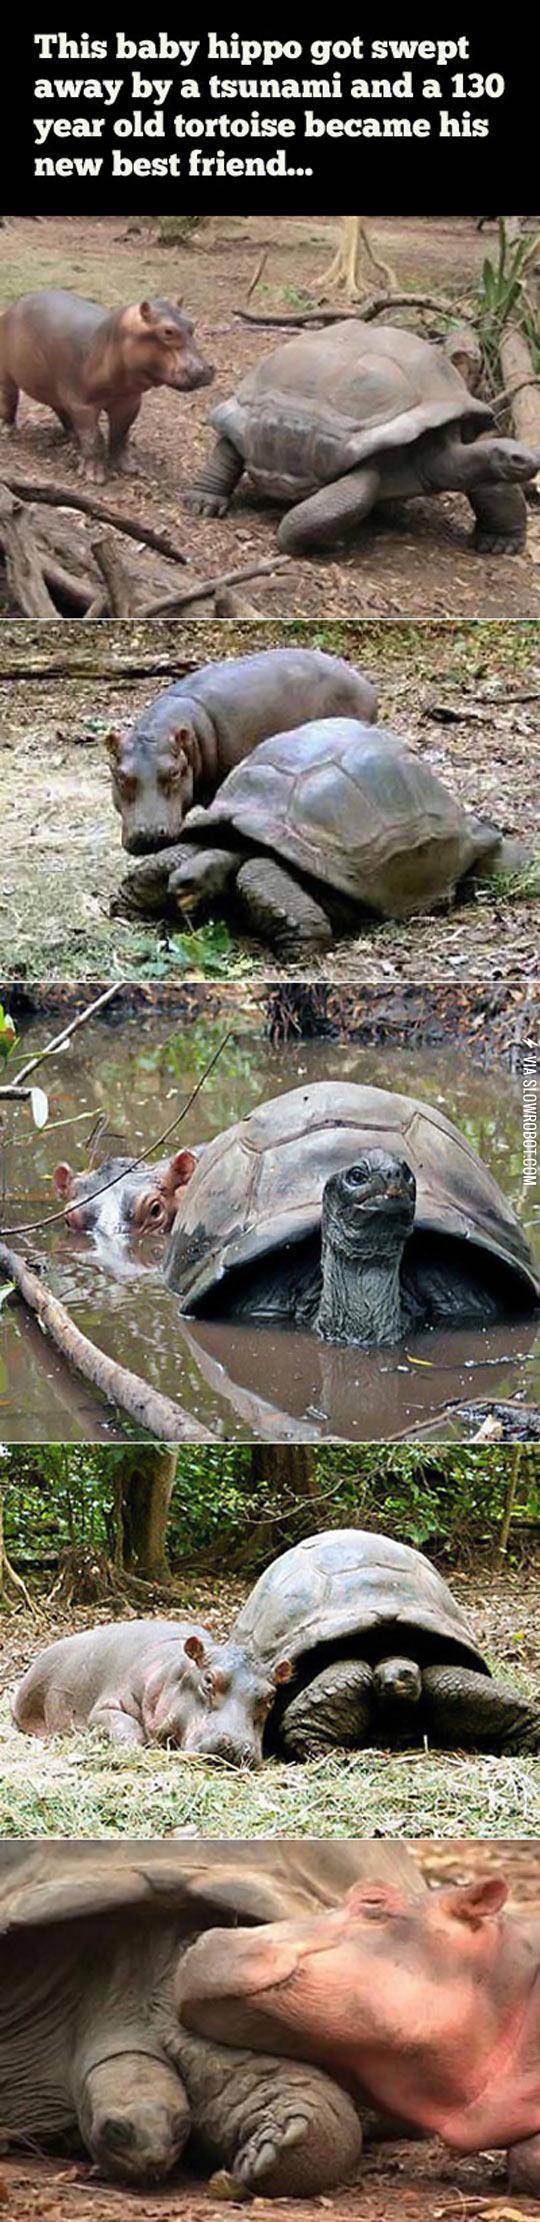 Baby+Hippo+And+130+Year+Old+Tortoise+Become+Friends